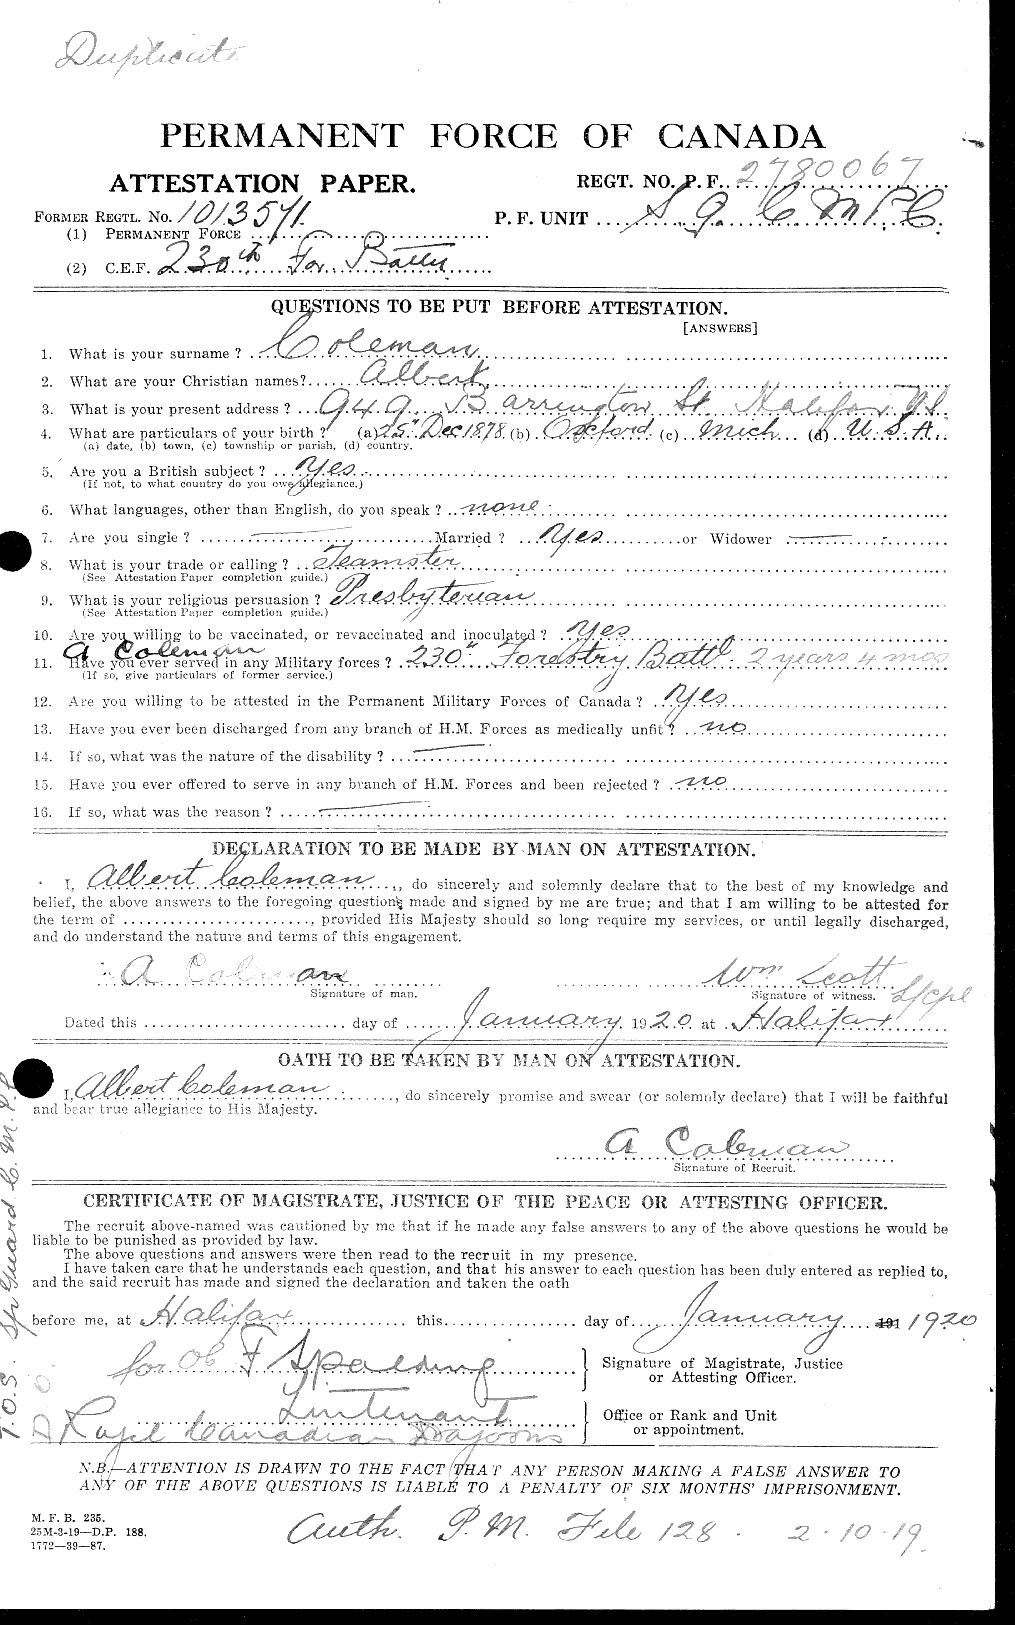 Personnel Records of the First World War - CEF 028044a